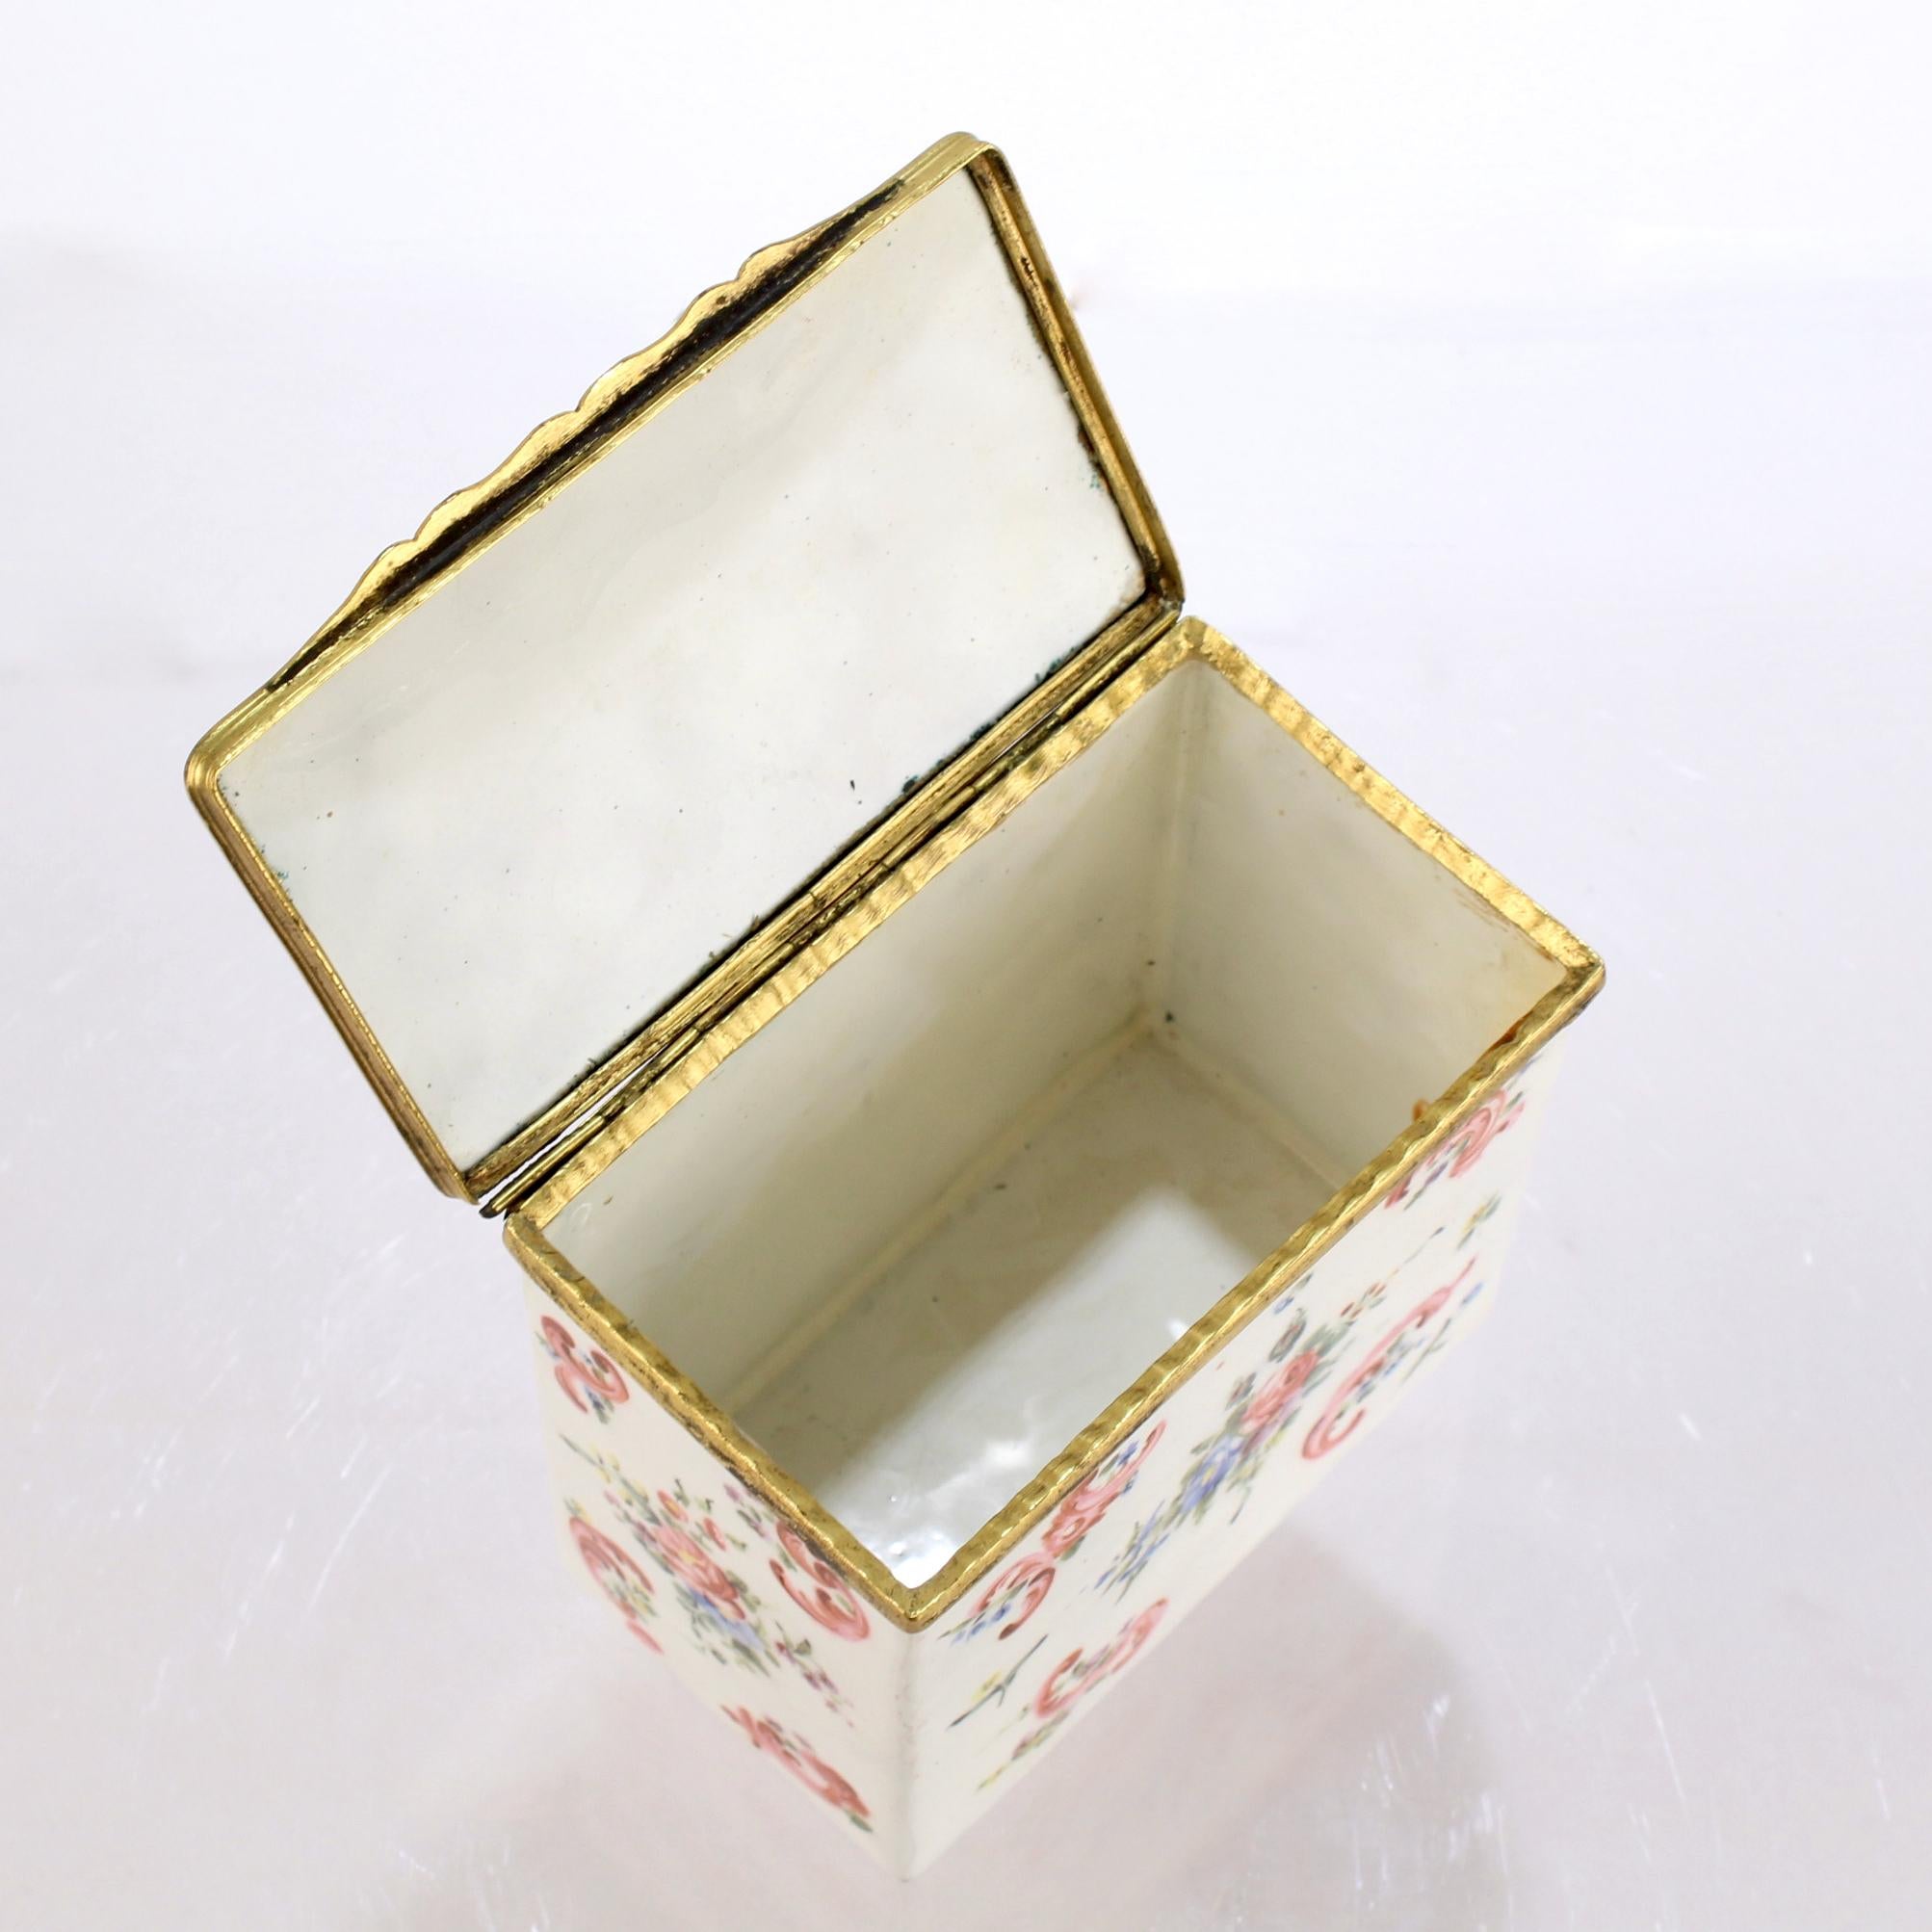 Antique 18c/19c English or French Enamel Bronze Mounted Tea Caddy Box For Sale 5